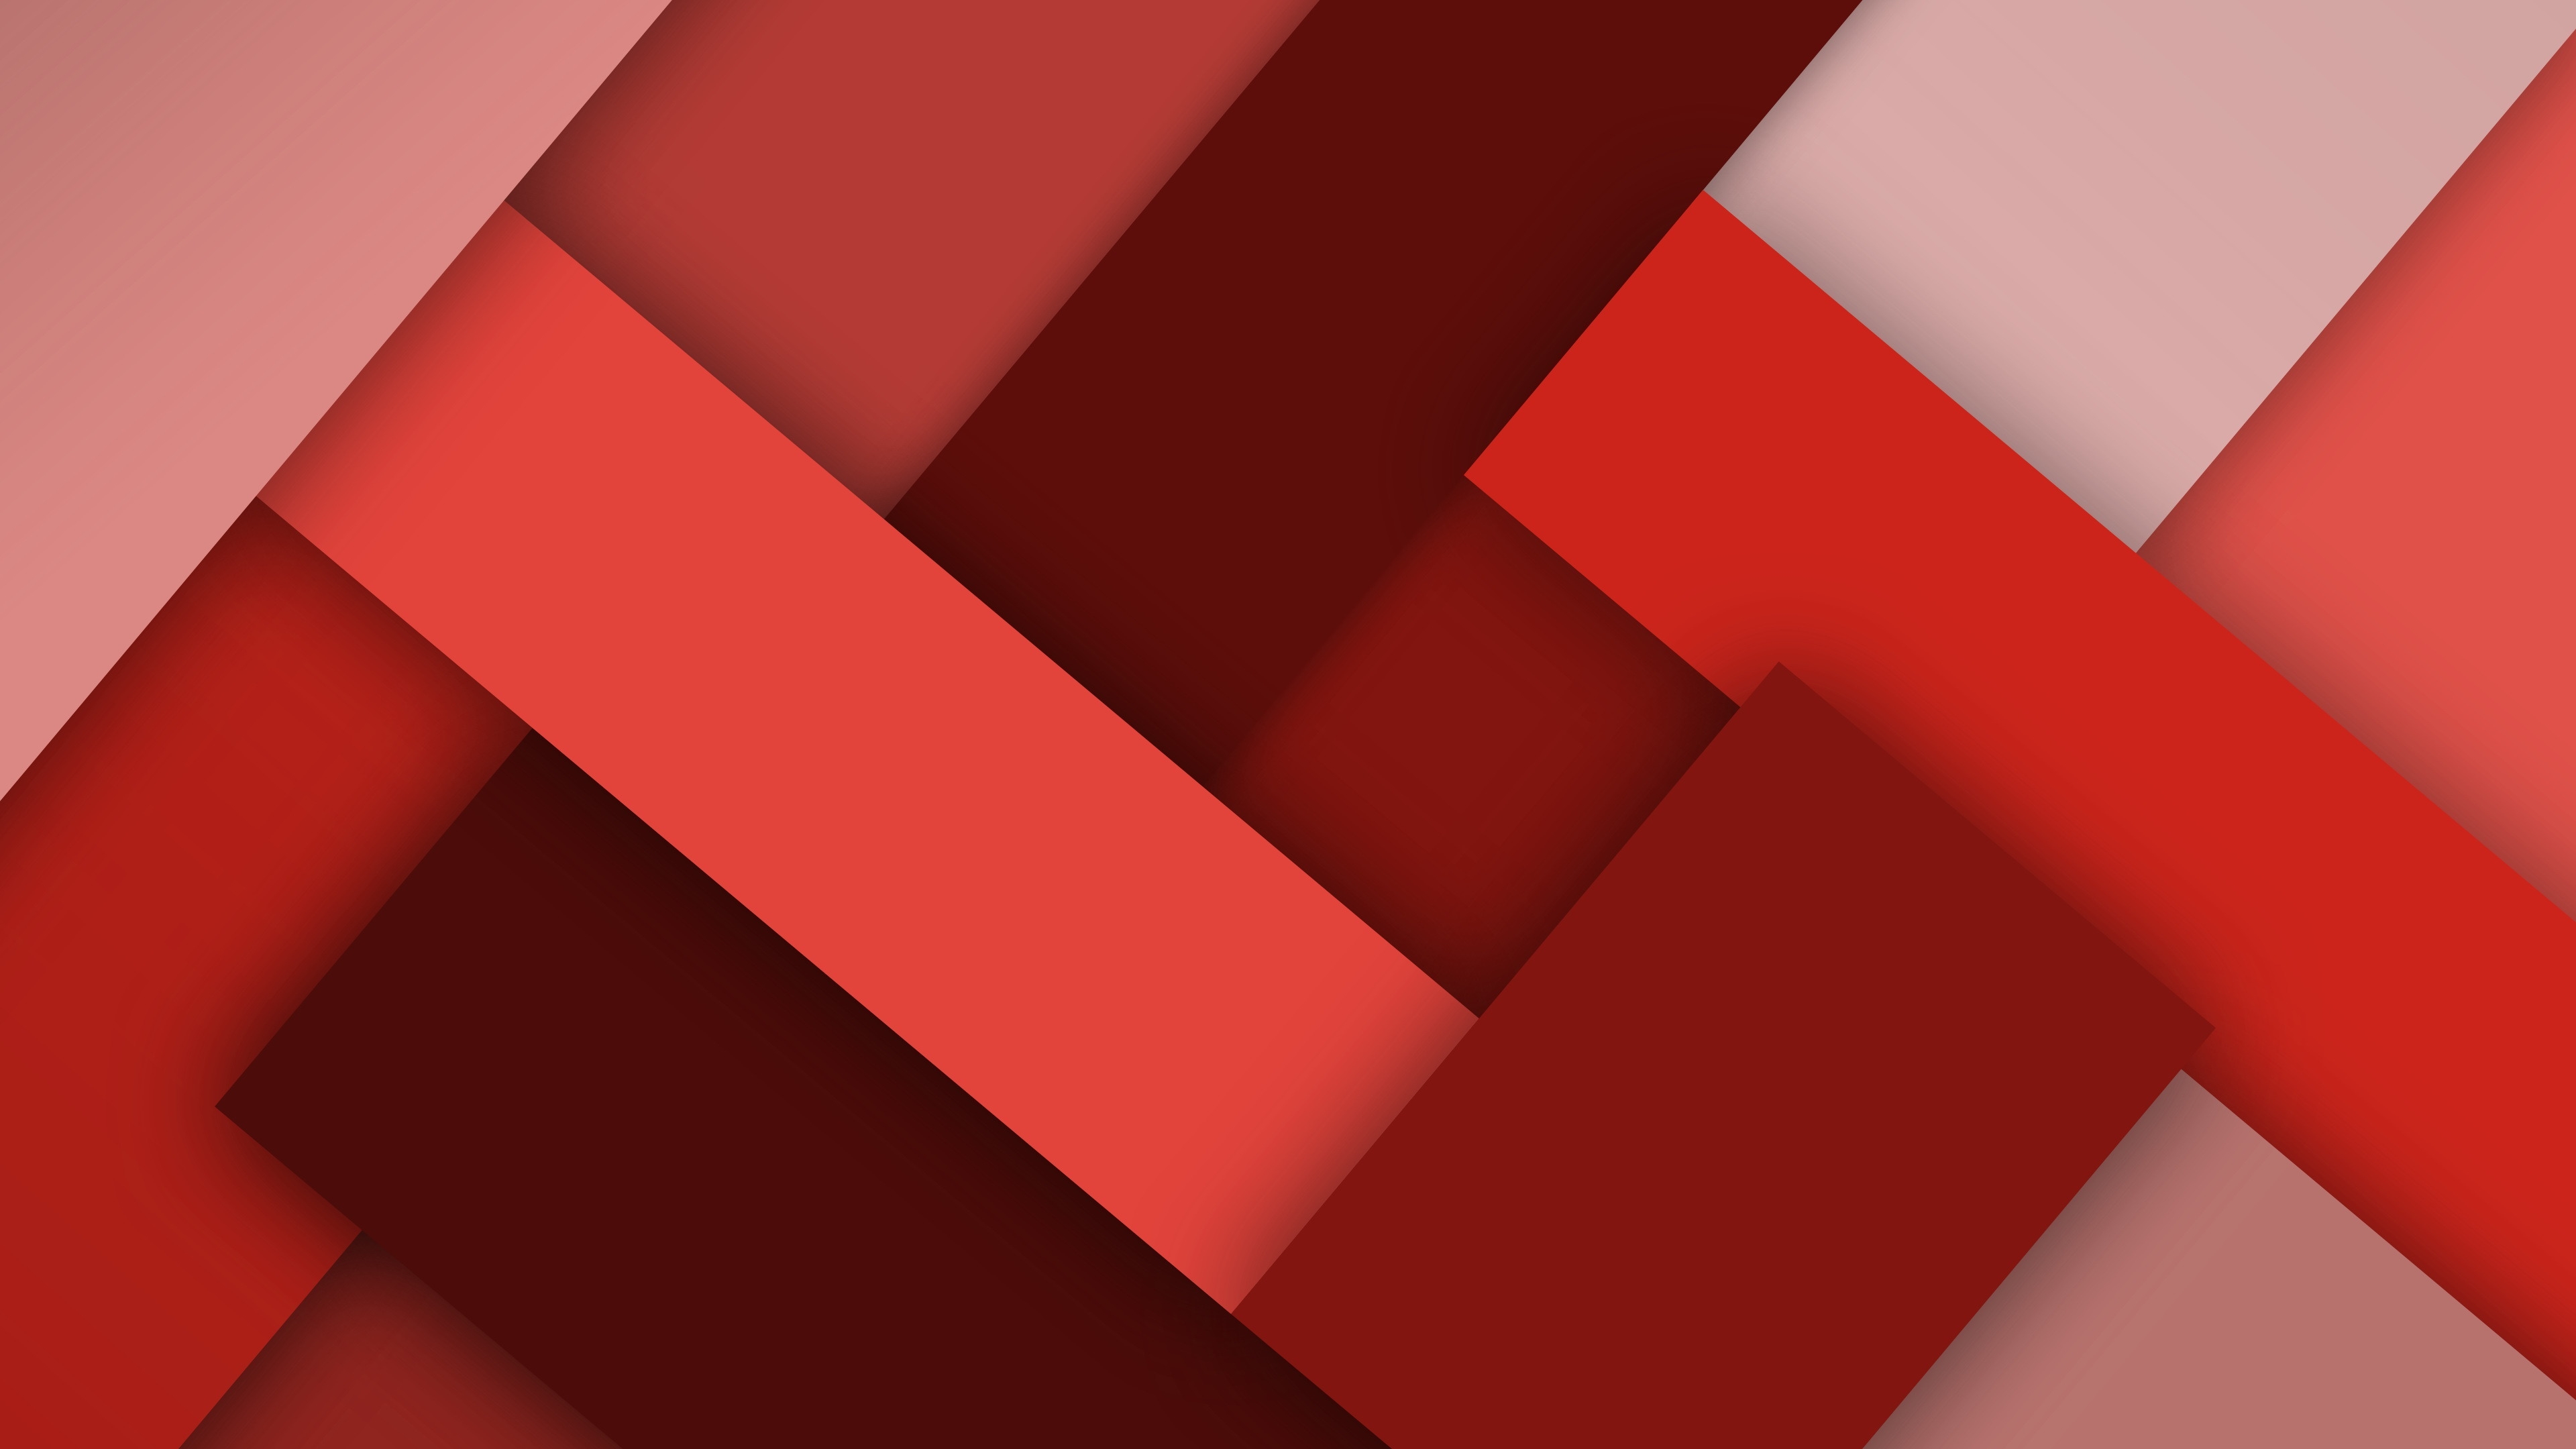 Red Stripes for 3840 x 2160 Ultra HD resolution